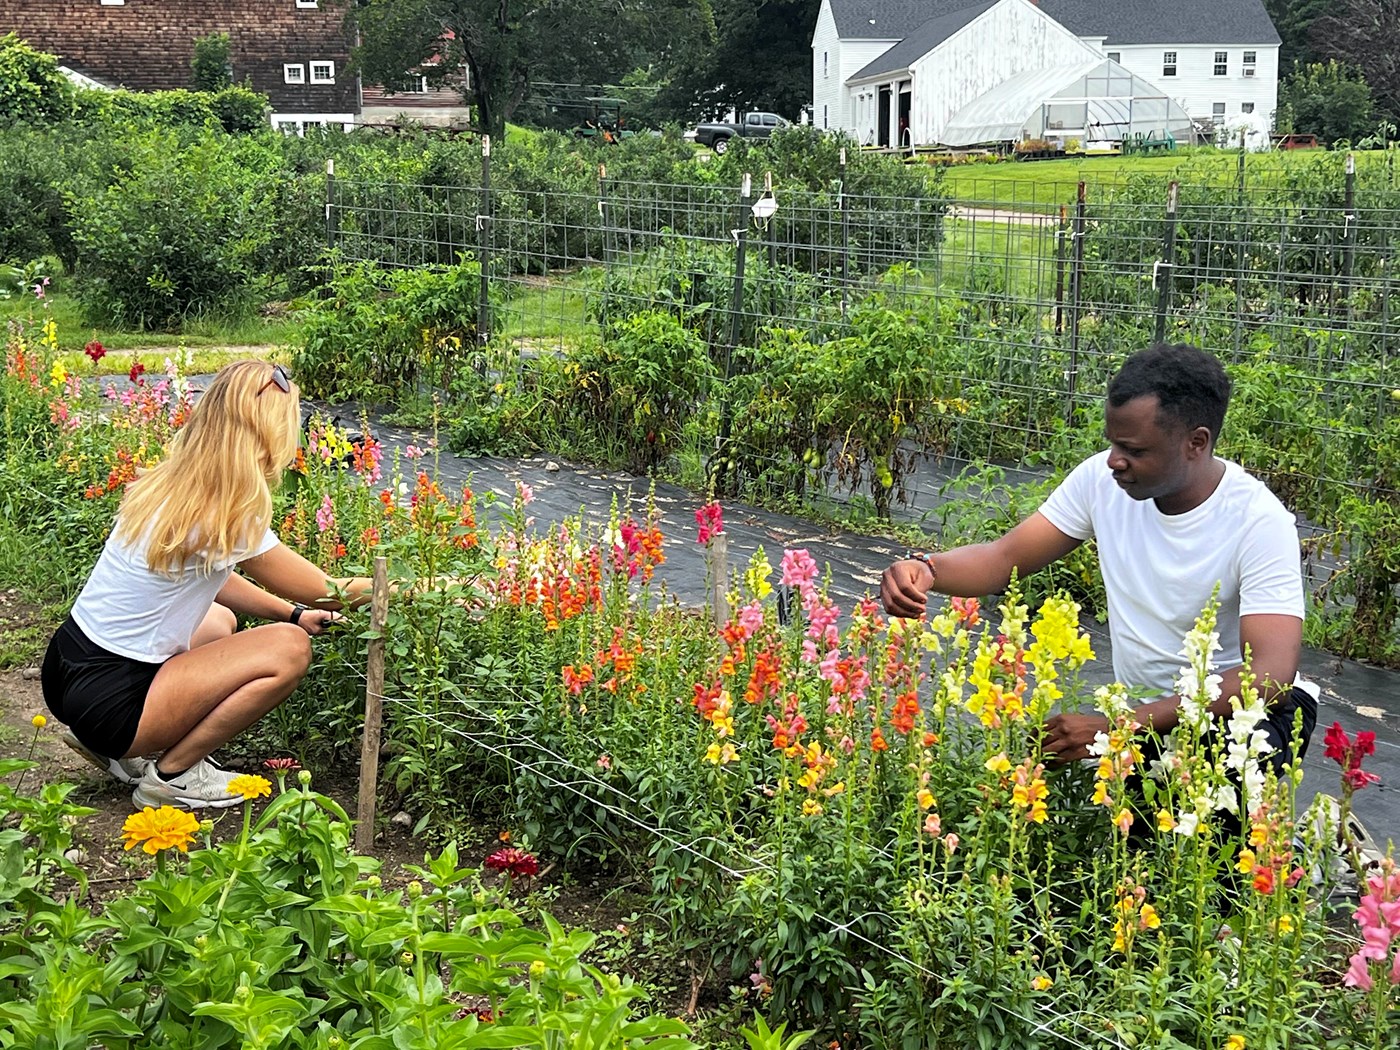 Students, Victoria Wisniewski (left) and Thadeus Joseph (right), look at an assortment of yellow, purple, orange, and white flowers on a farm, with a white structure and greenhouse in the background.